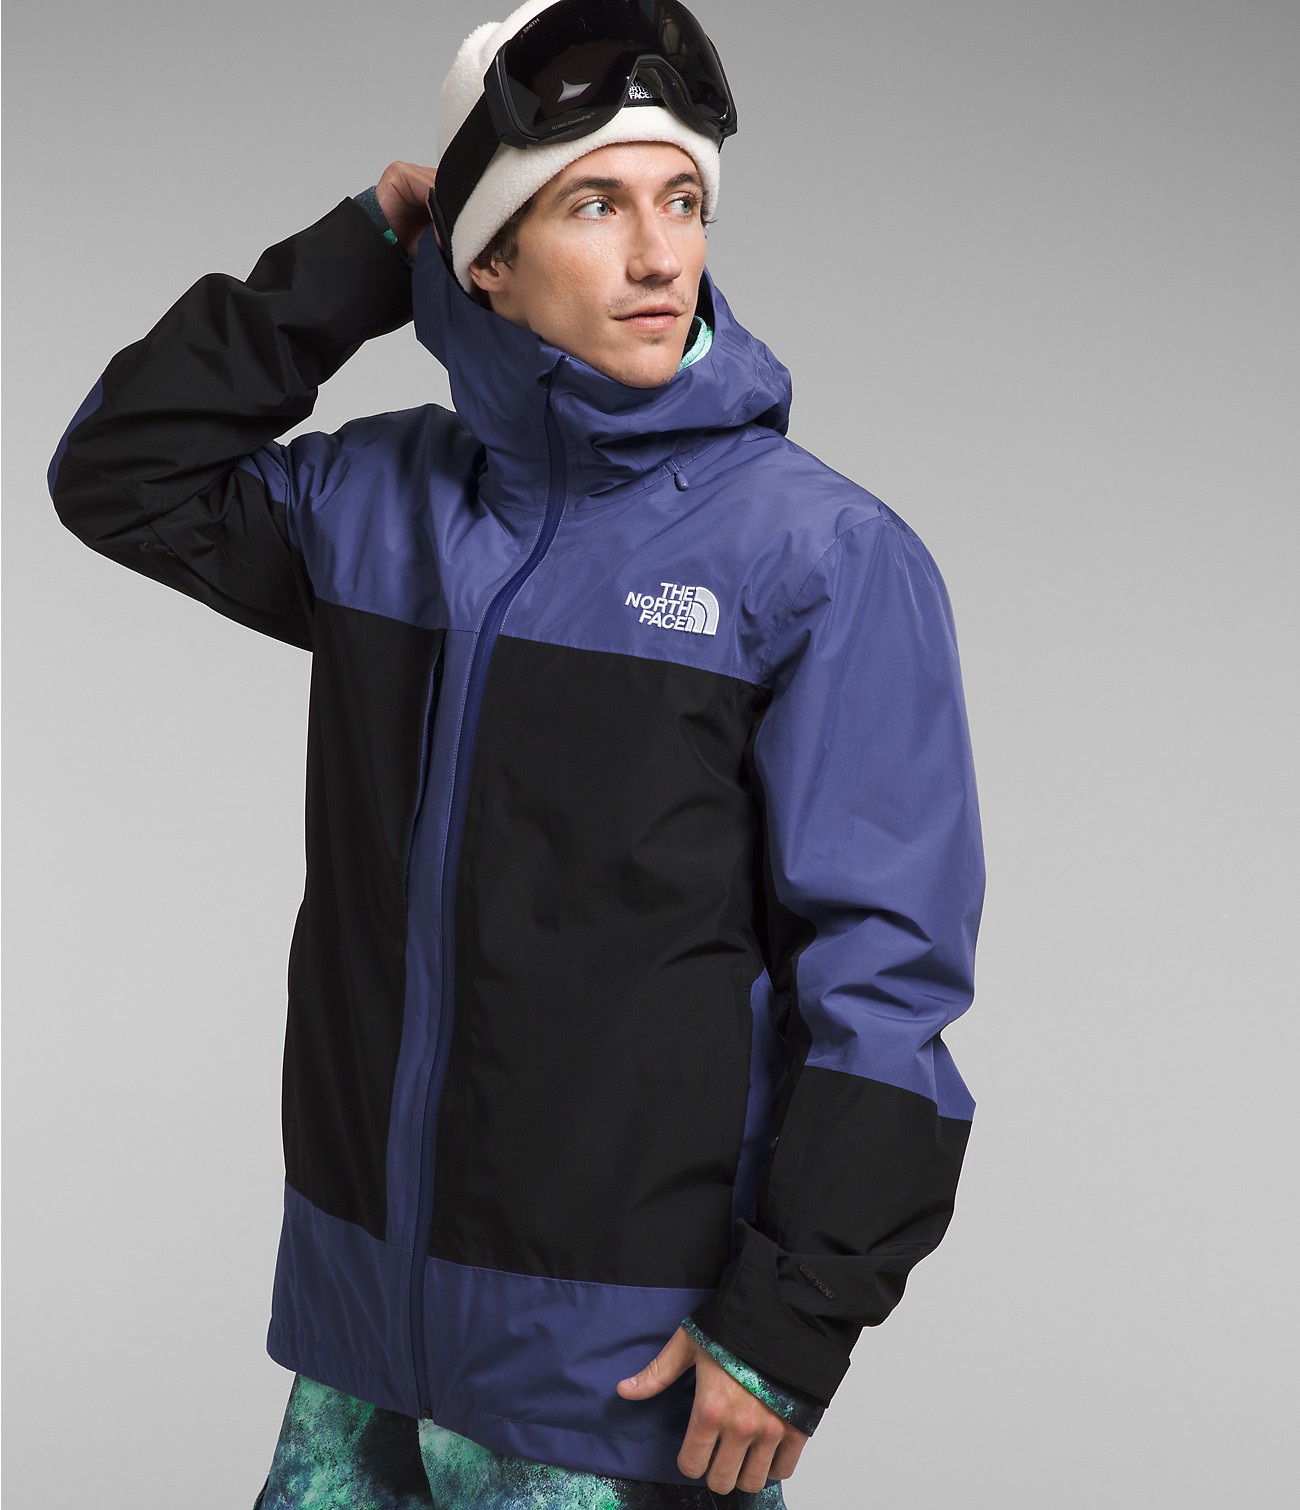 Unlock Wilderness' choice in the Wantdo Vs North Face comparison, the ThermoBall™ Eco Snow Triclimate® Jacket by The North Face